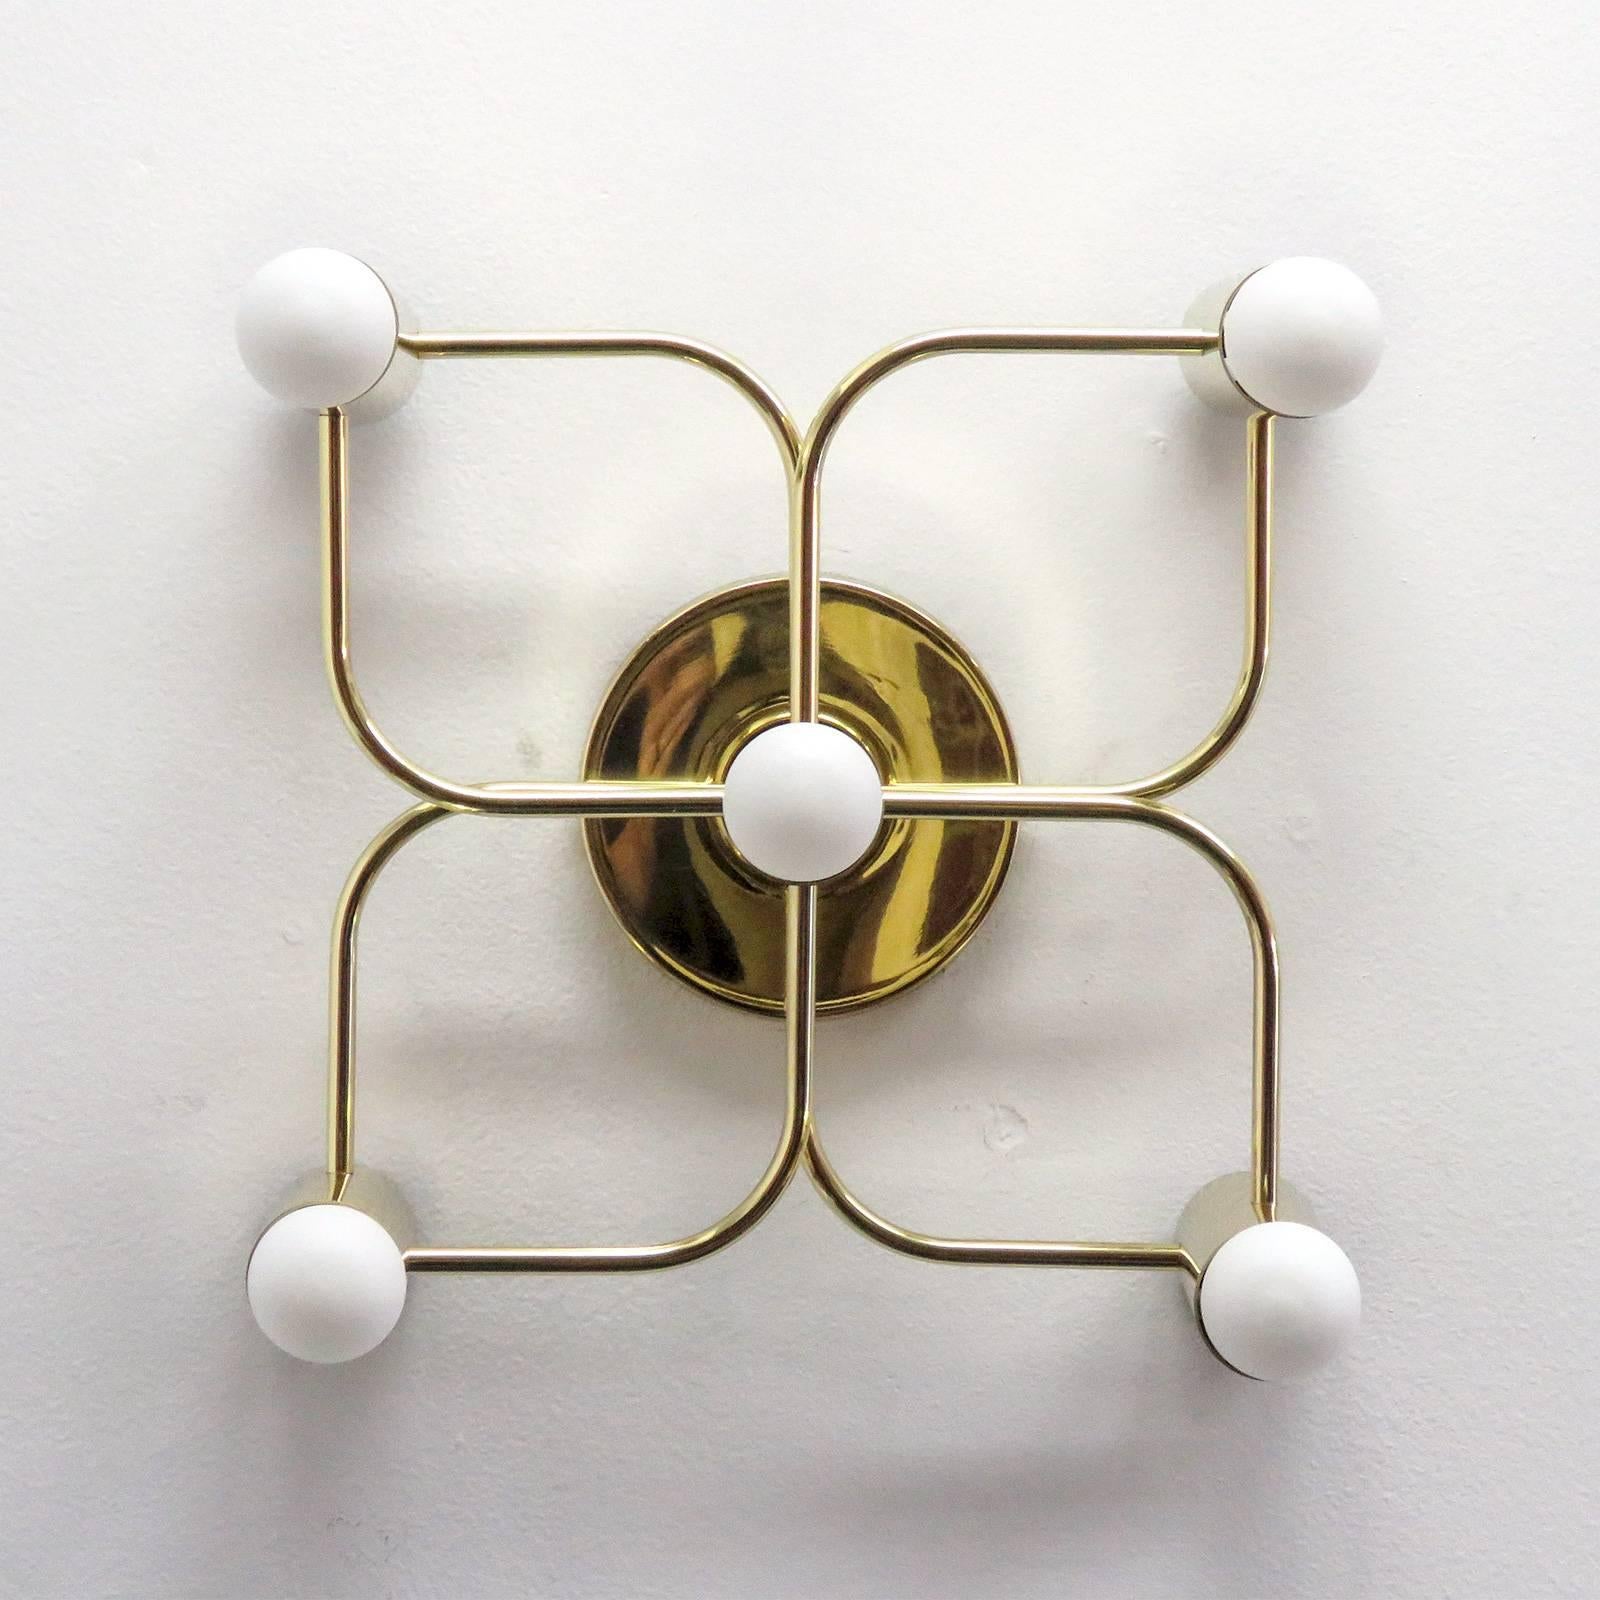 Wonderful German five-light polished brass flush mount lights, can be used as wall or ceiling lights.